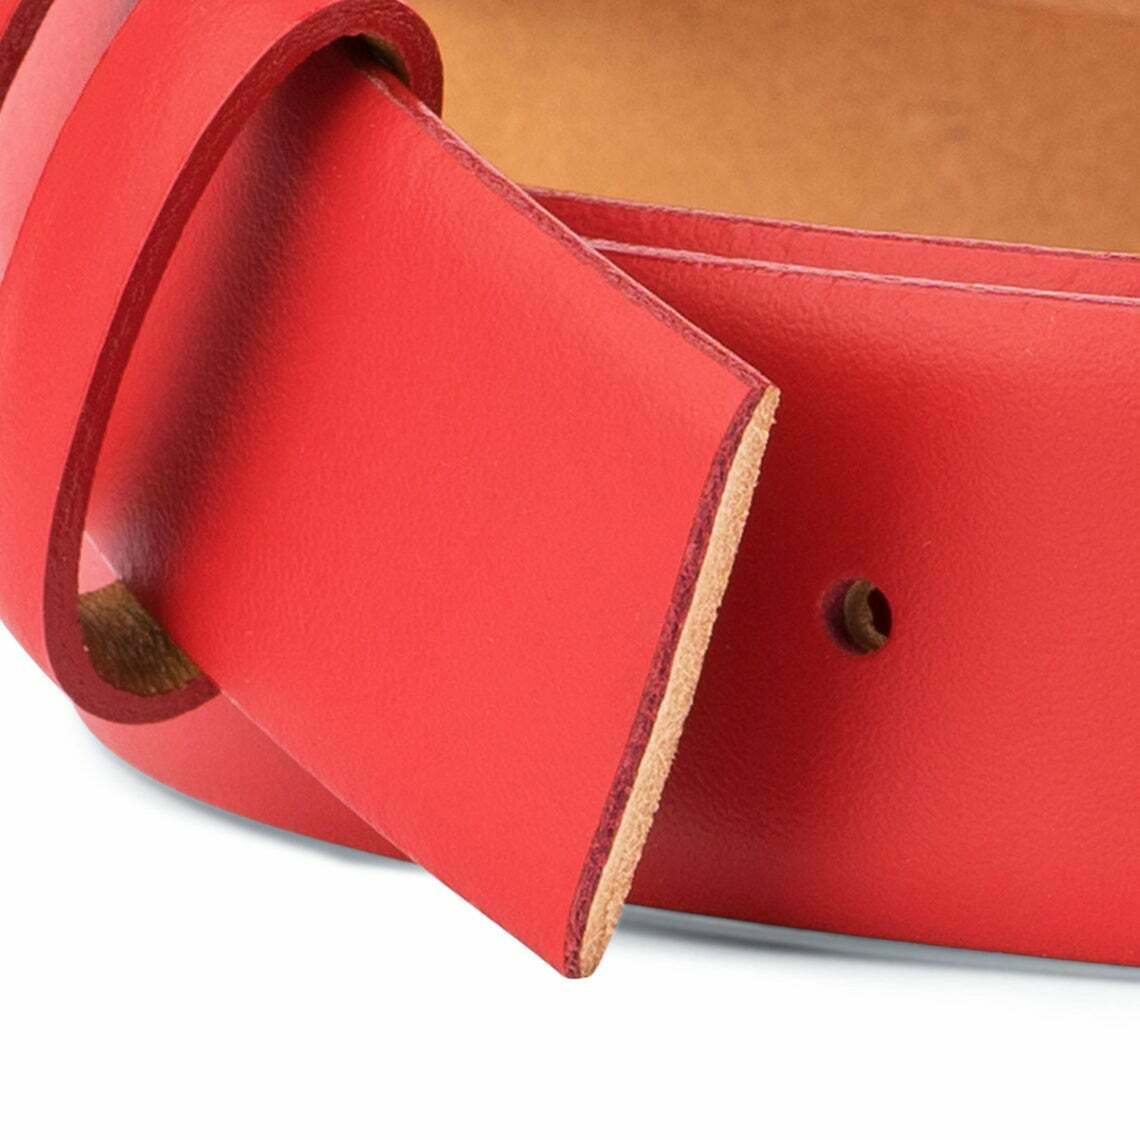 Men's Red Belt Strap Replacement For Cartier Buckle Genuine Leather 35mm Women